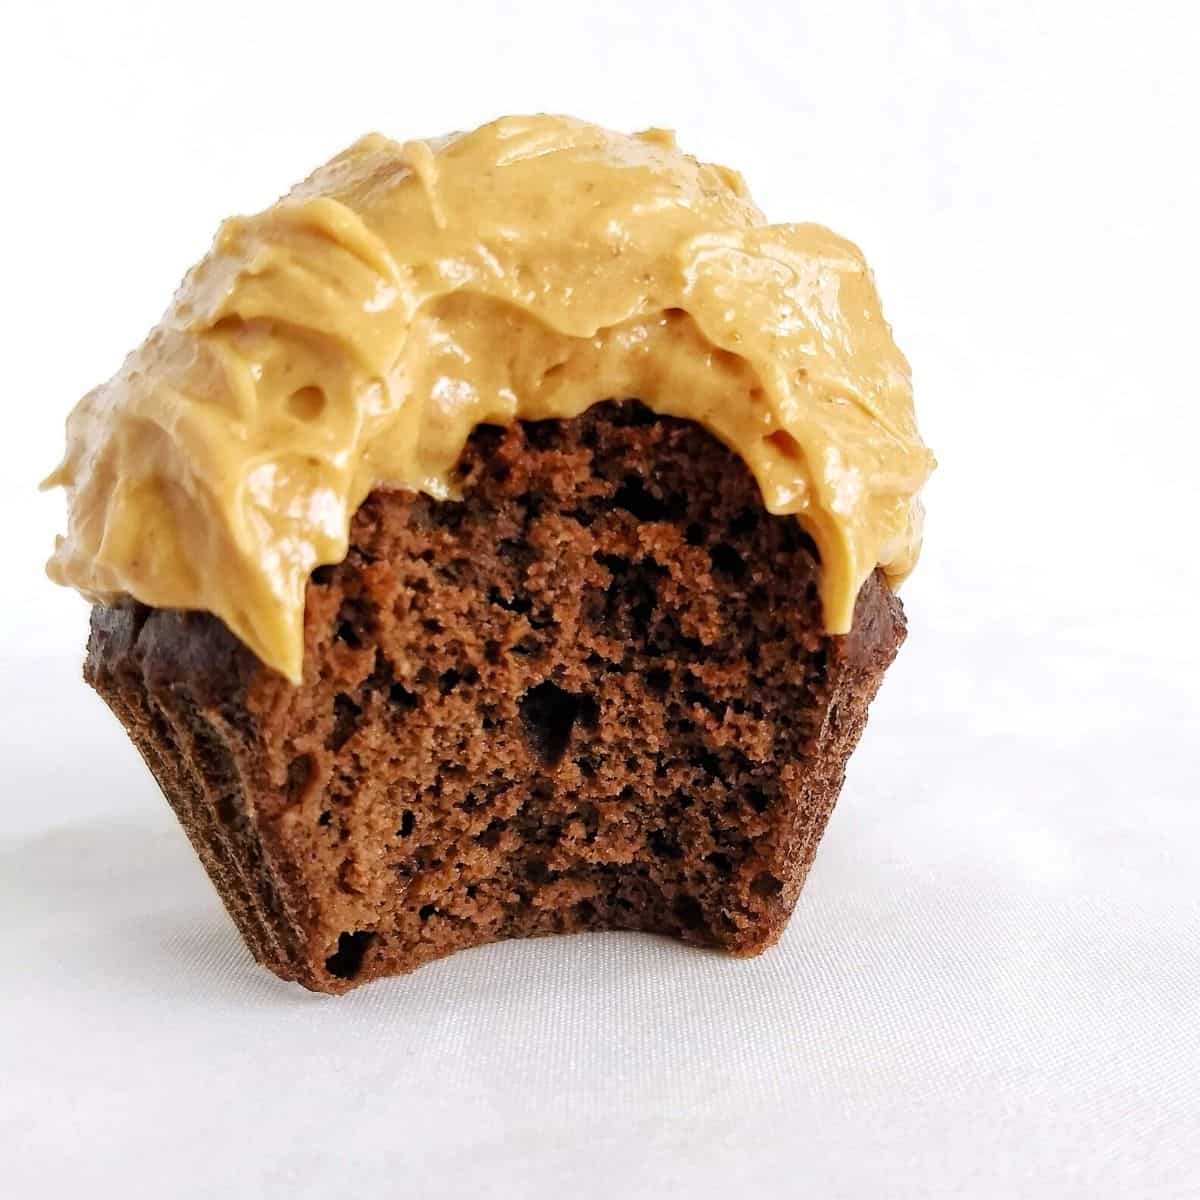 29 - Keto Chocolate Cupcakes with Peanut Butter Frosting